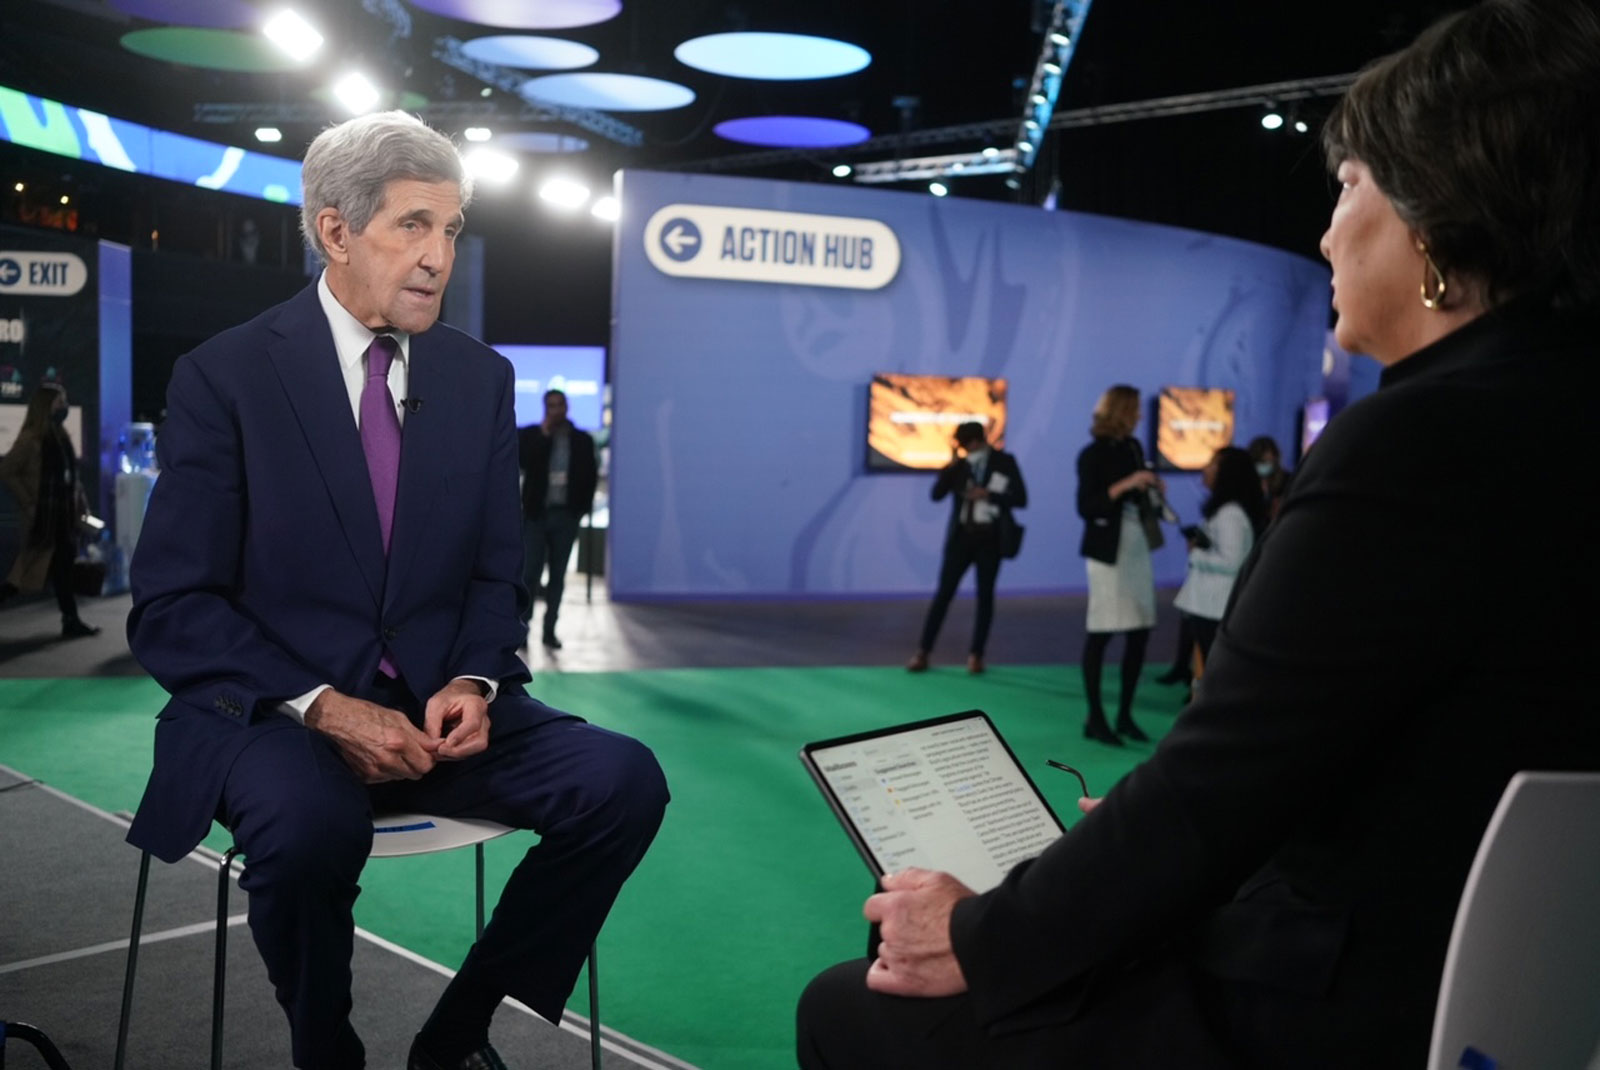 John Kerry, the United States' special presidential envoy for climate, speaks with CNN's Christiane Amanpour at COP26 in Glasgow, Scotland, on November 2.